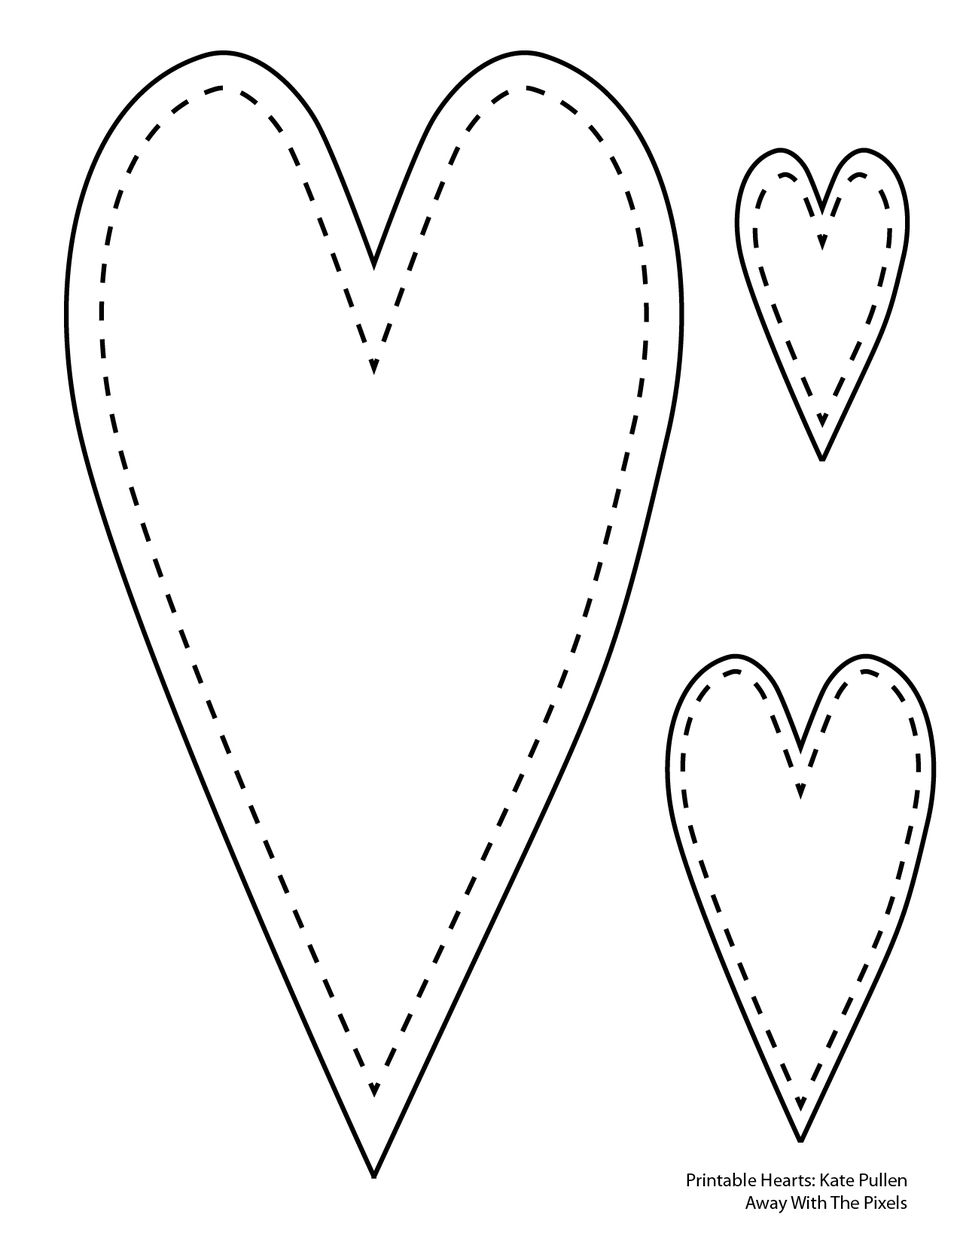 Download 6 Free Printable Heart Templates